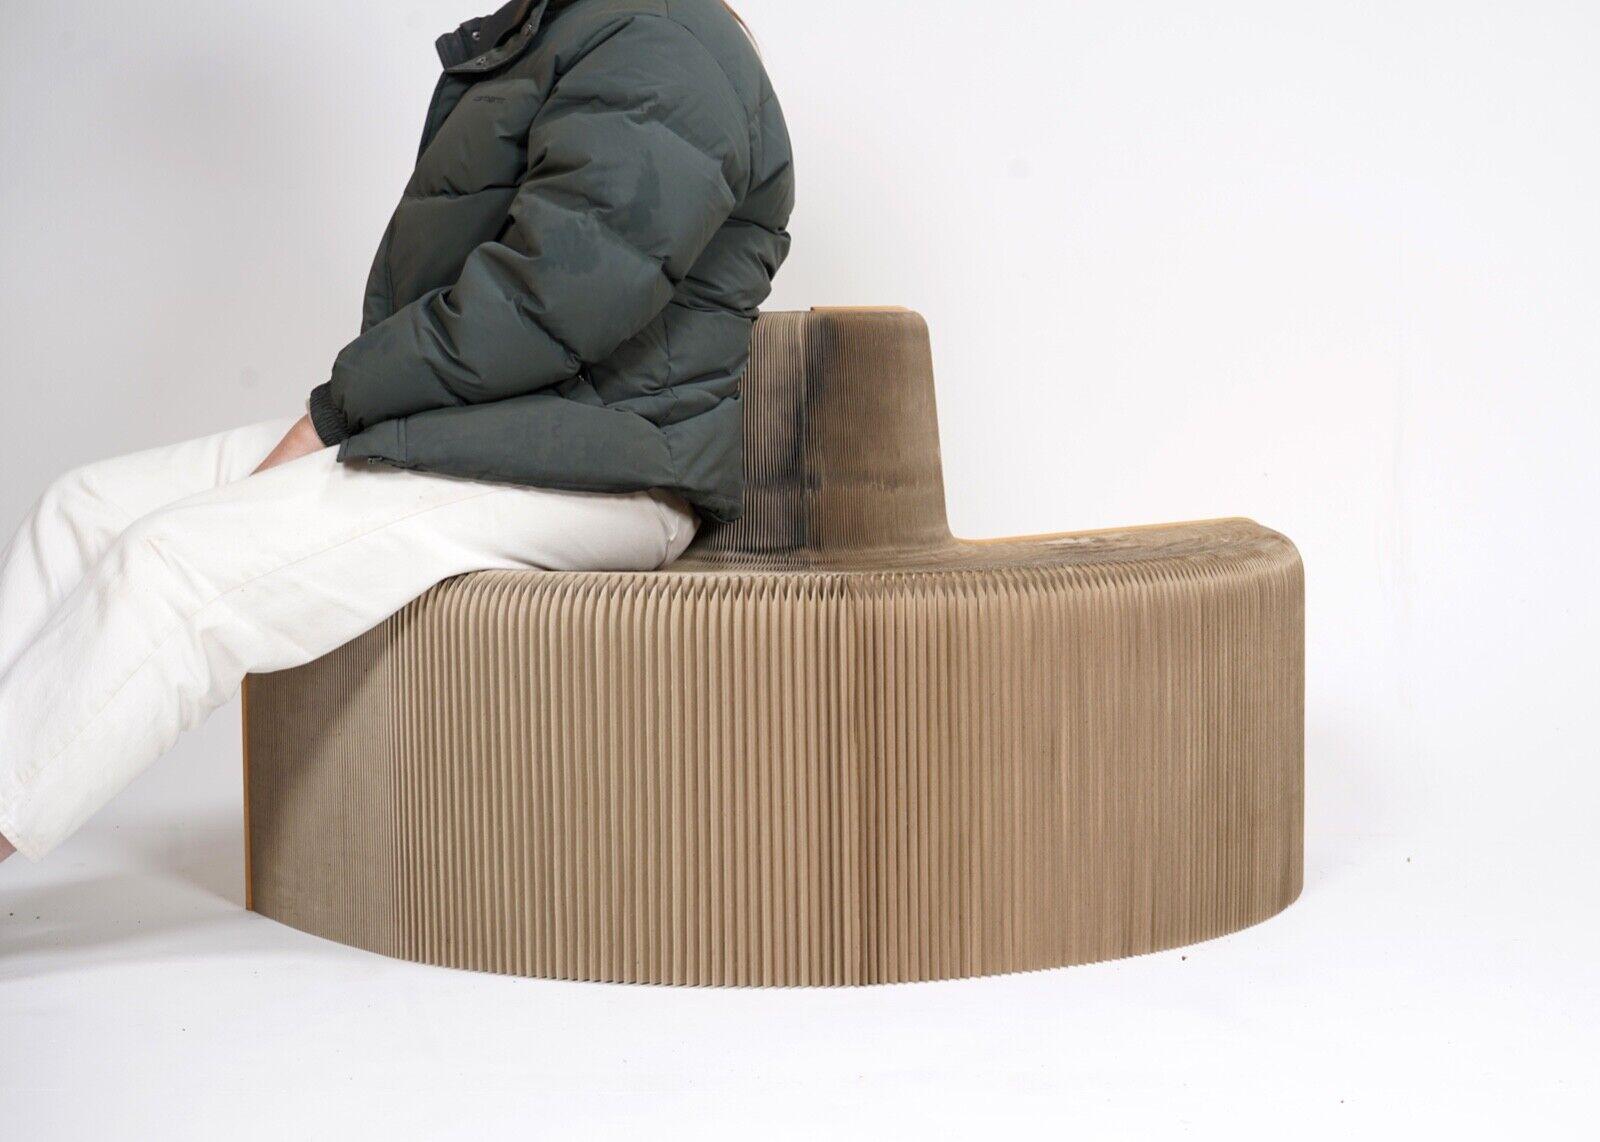 Flexiblelove furniture designed by Chishen Chiu in the early 2000s.
Made from 100% recycled materials.
The clever 'accordion honeycomb structure' allows it to flat pack down and open up over 2 meters.

Condition 
Please do take a careful look